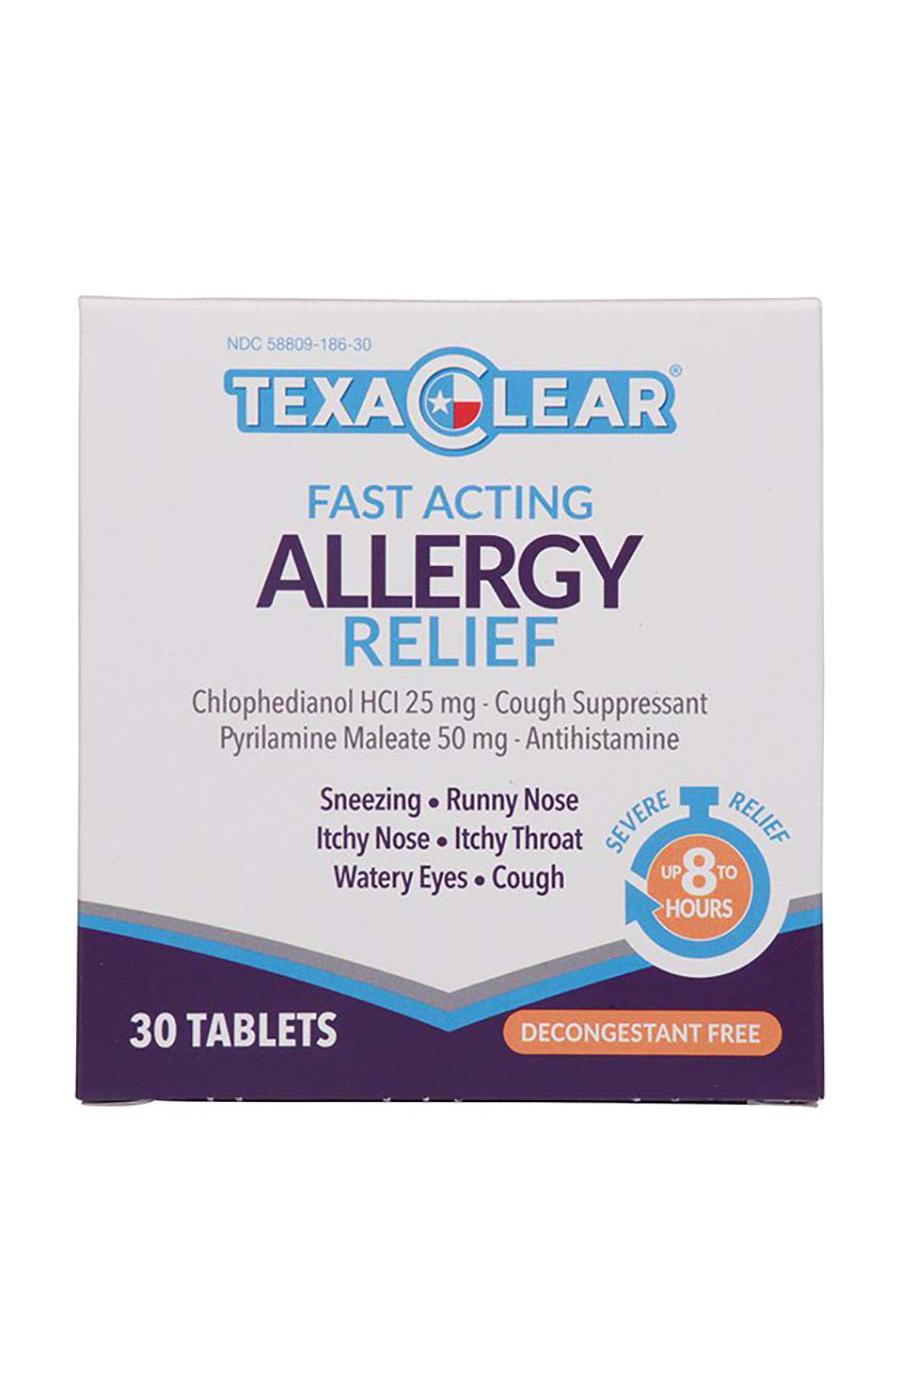 TexaClear Allergy Relief Tablets; image 1 of 6